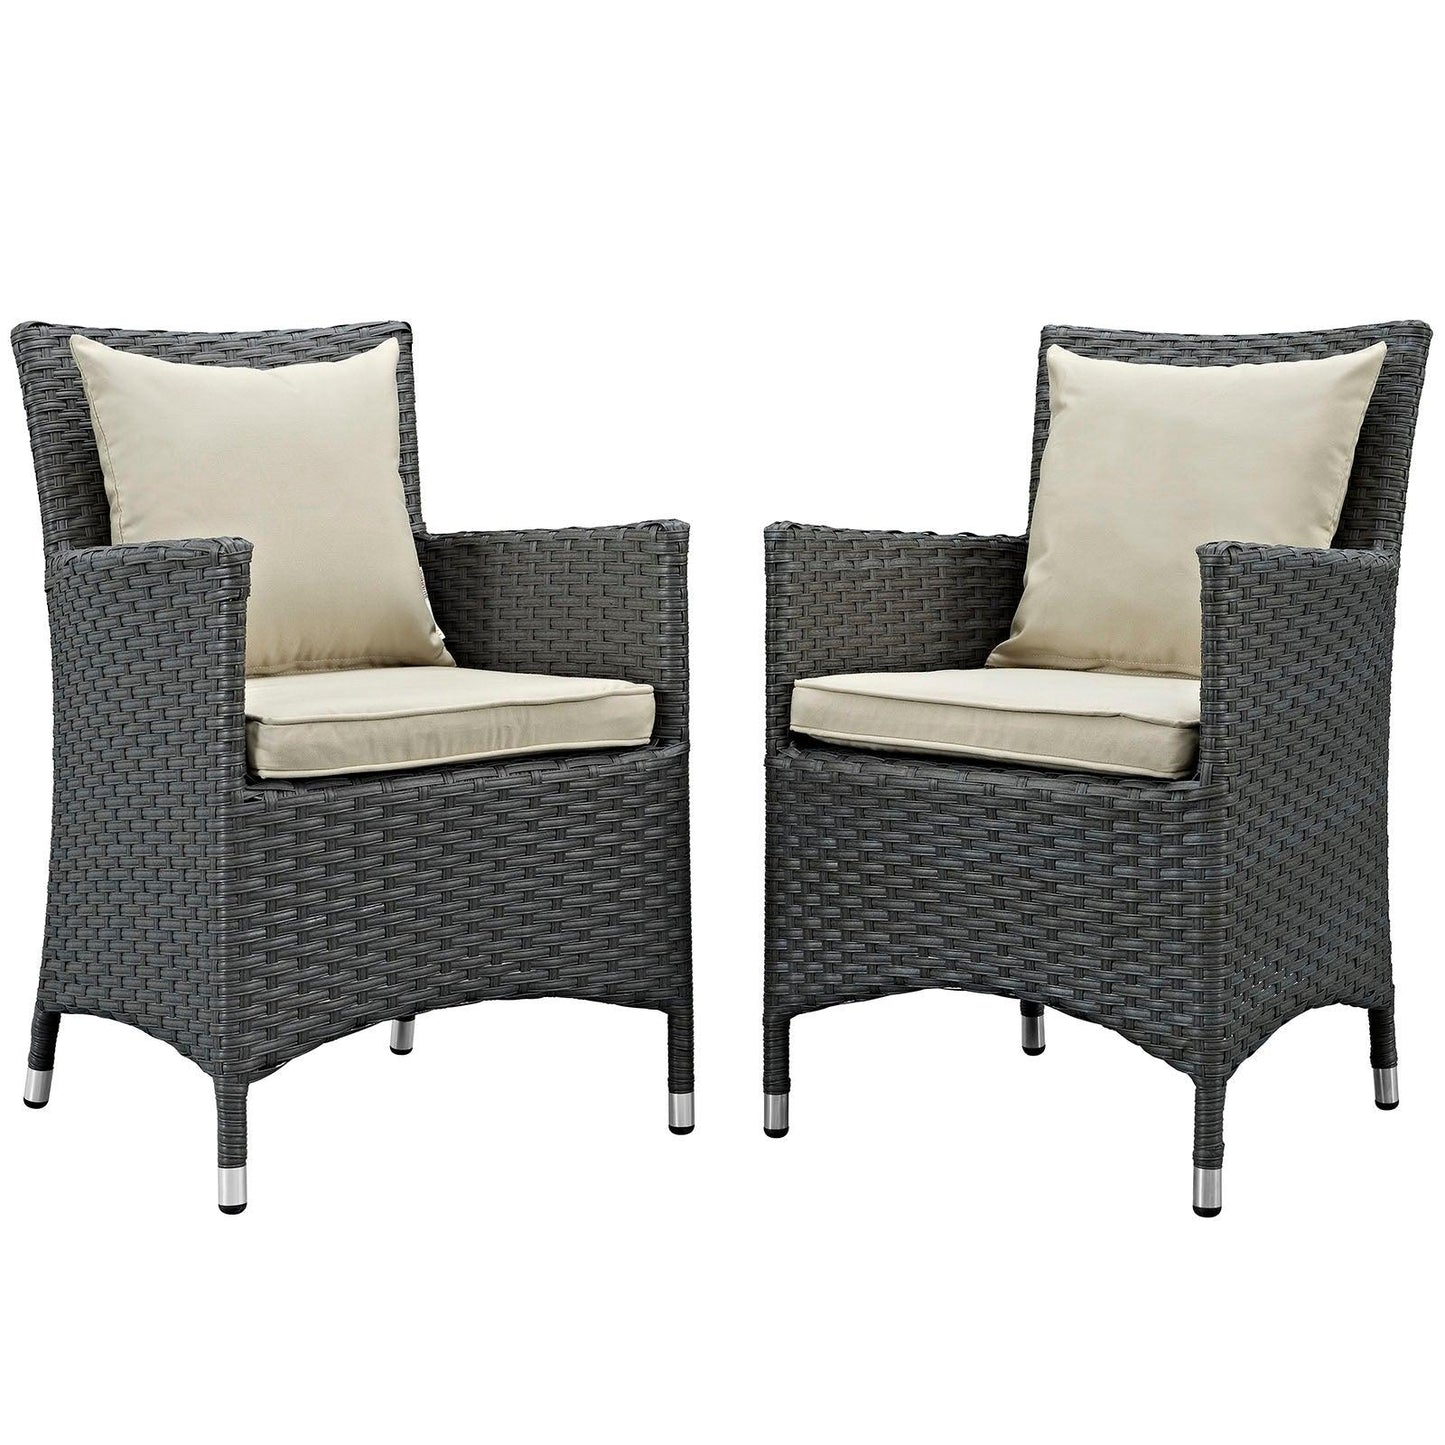 Modway Sojourn 2 Piece Outdoor Patio Sunbrella® Dining Set FredCo